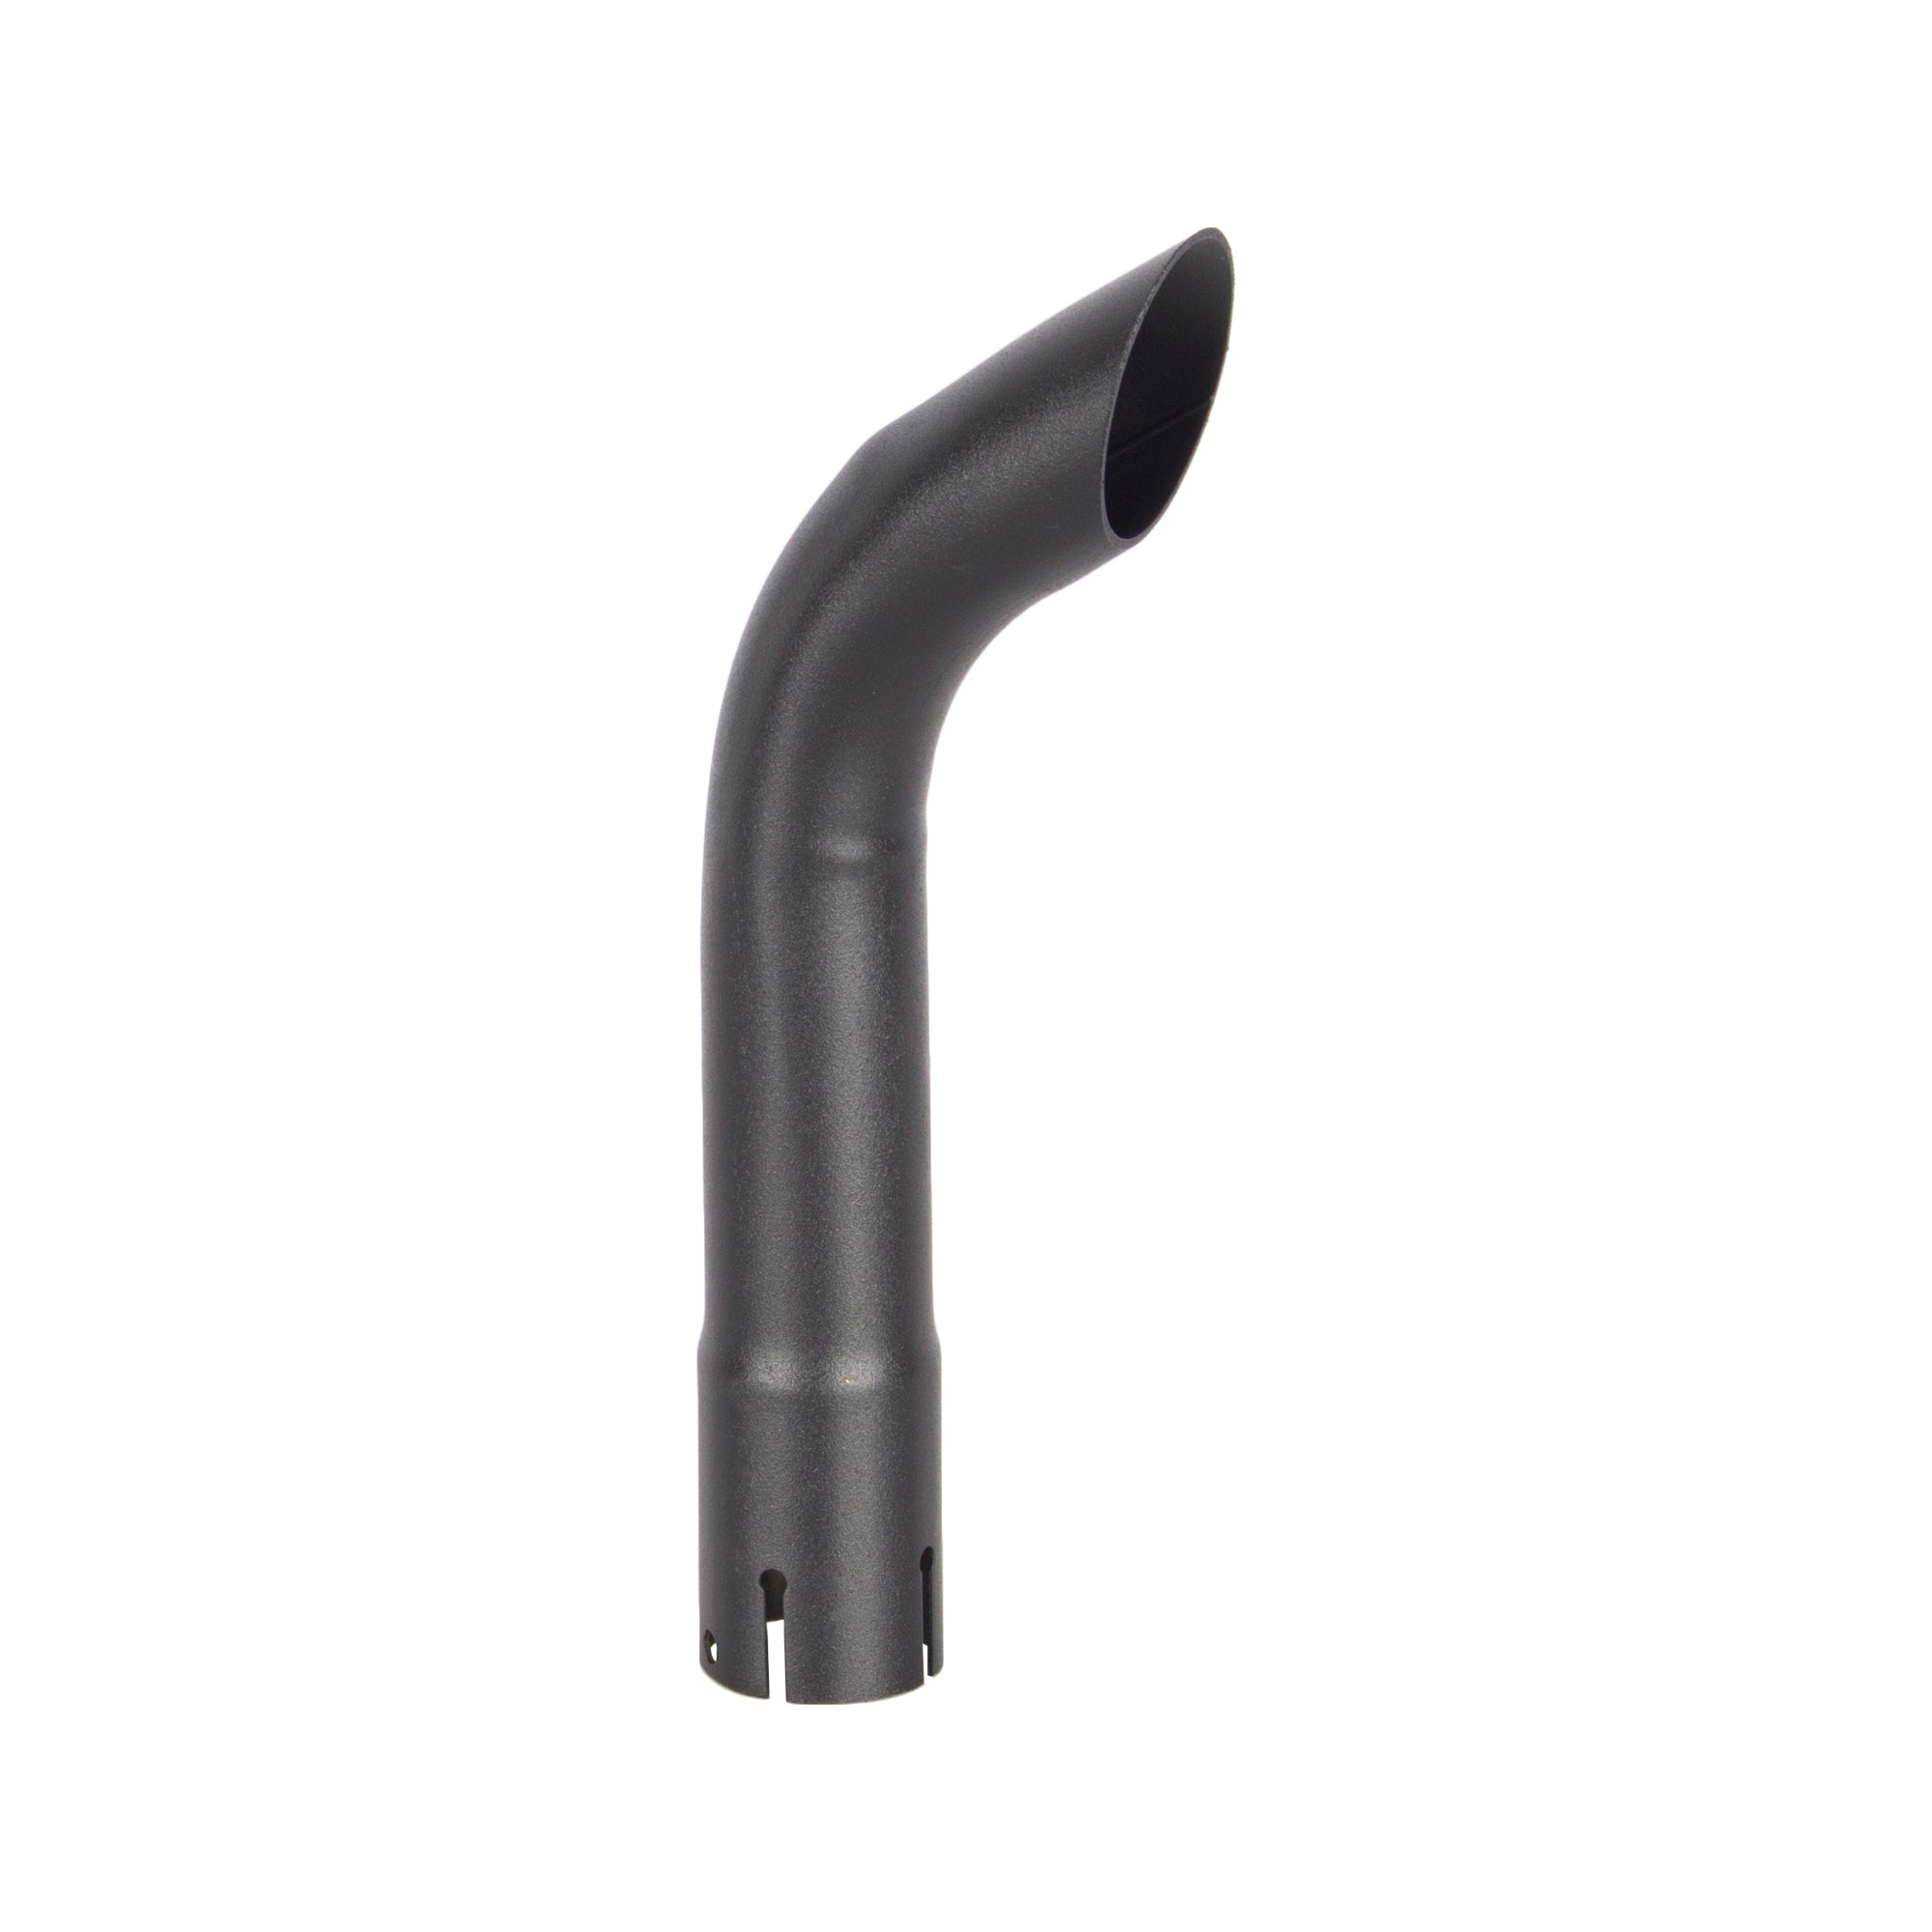 Exhaust Stack Pipe   1-3/4" x 12" Curved Black